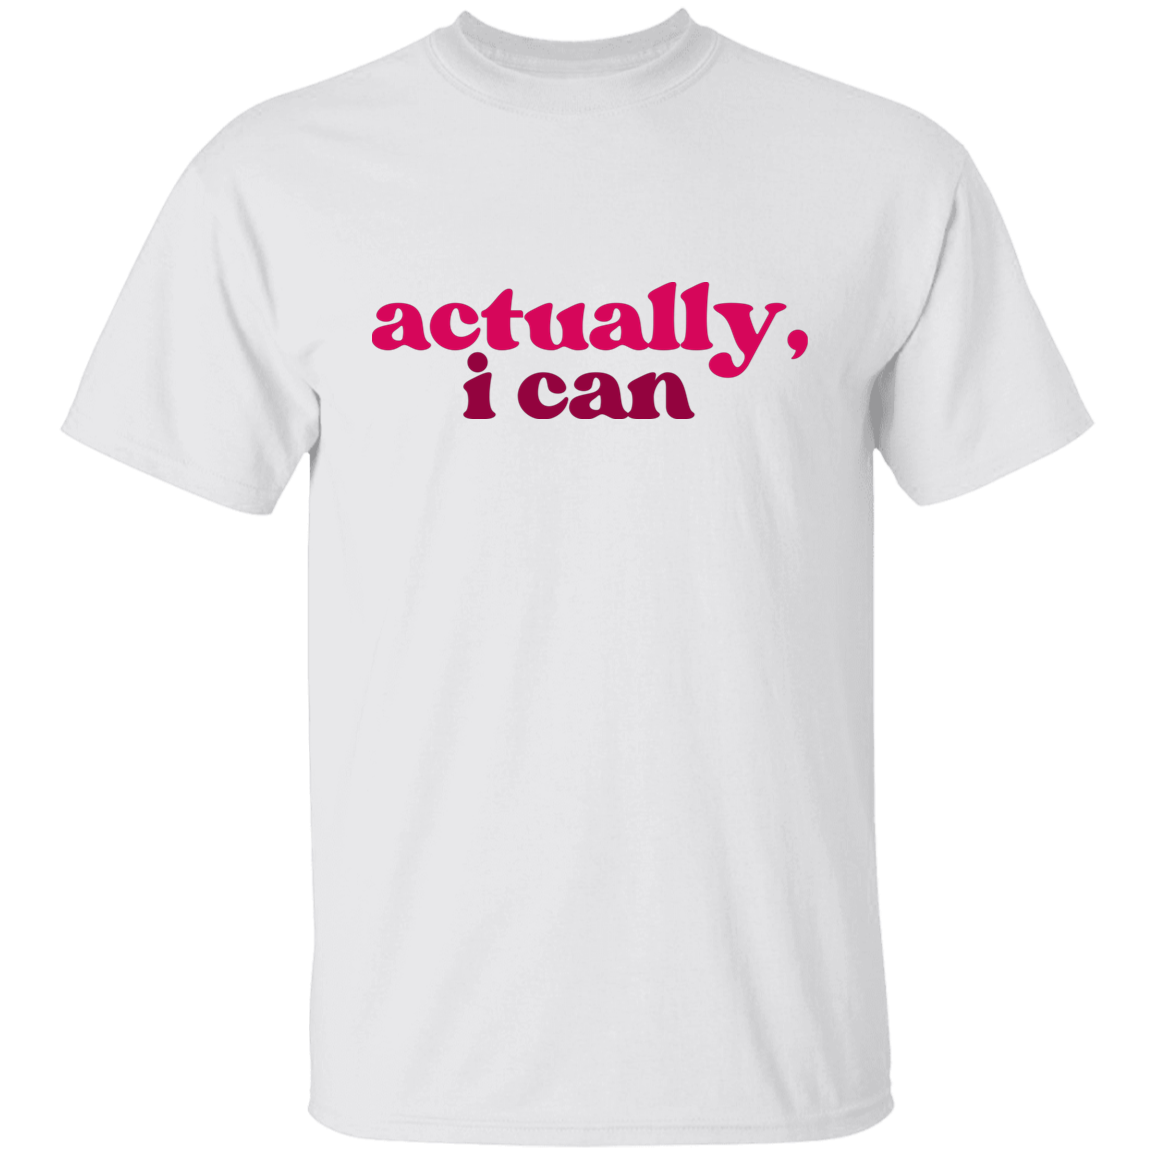 Actually, I Can T-Shirt Youth